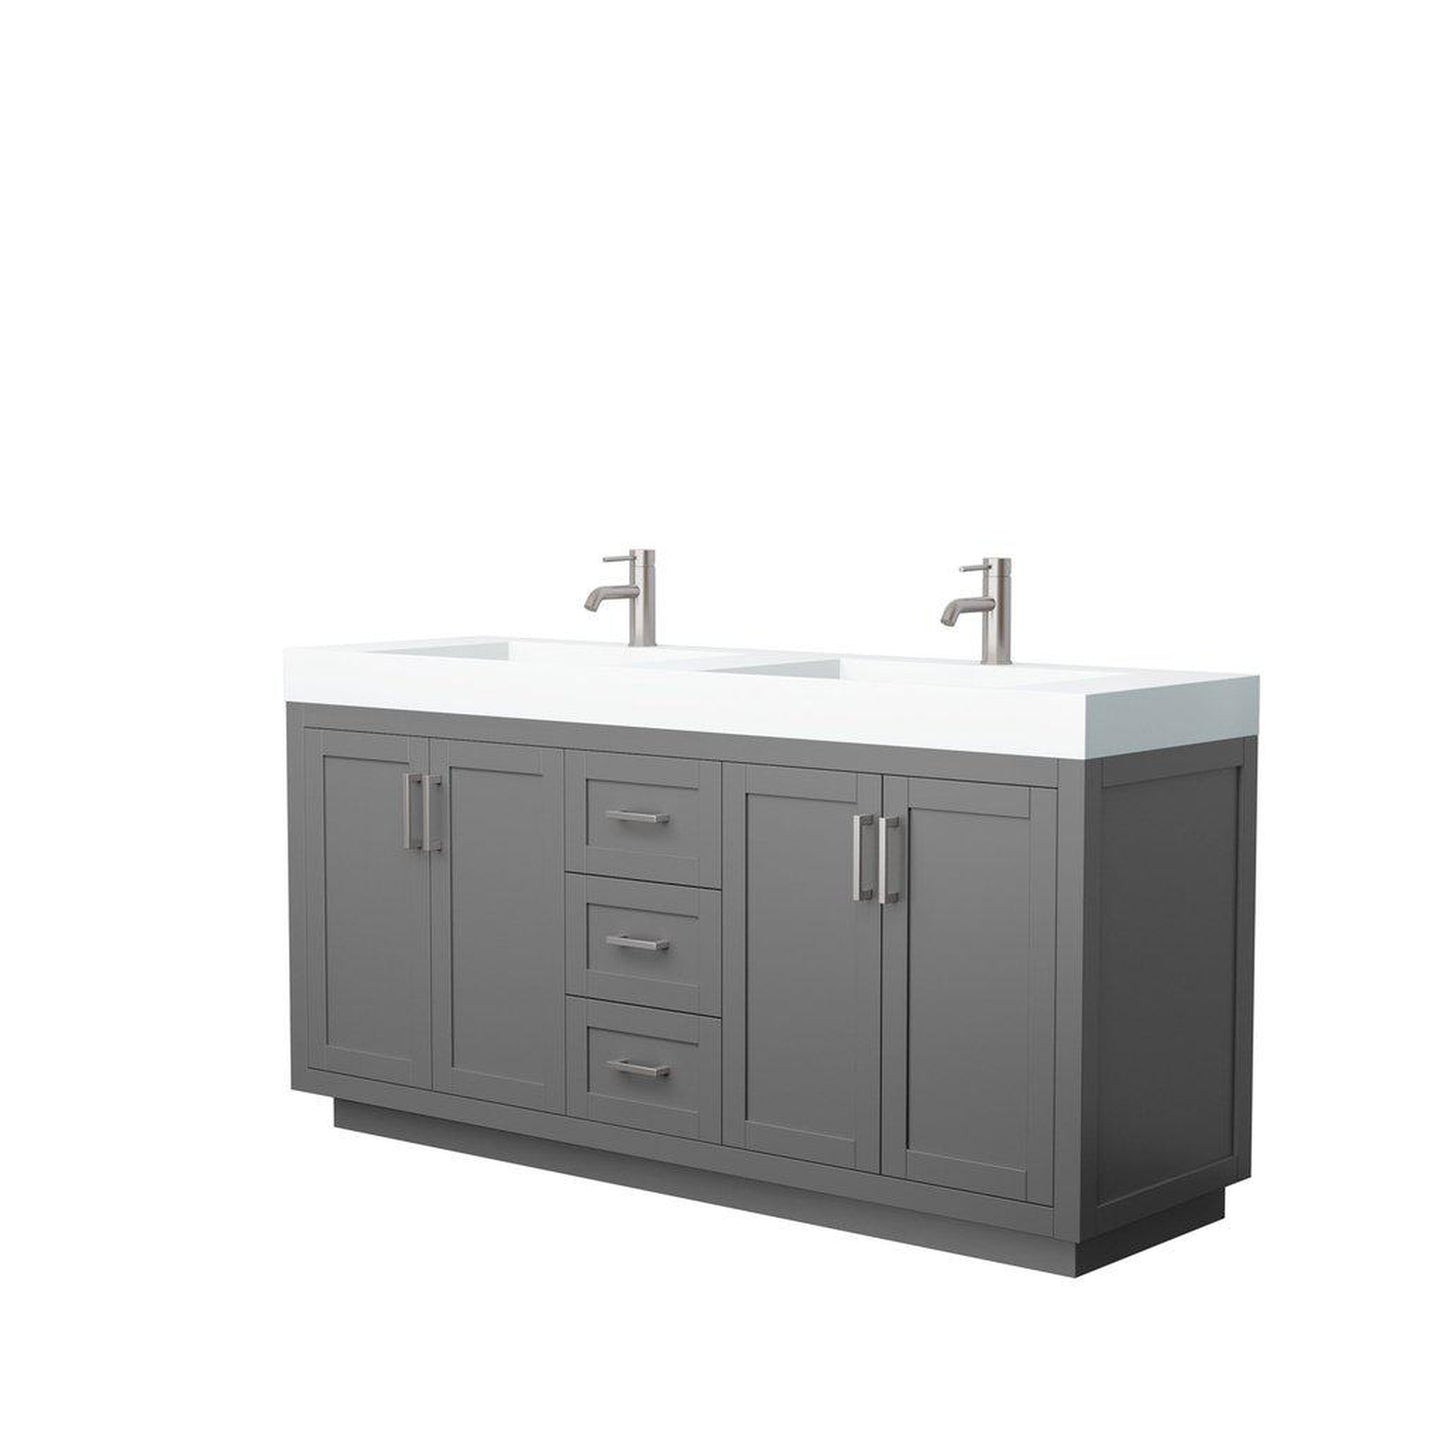 Wyndham Collection Miranda 72" Double Bathroom Dark Gray Vanity Set With 4" Thick Matte White Solid Surface Countertop, Integrated Sink, And Brushed Nickel Trim